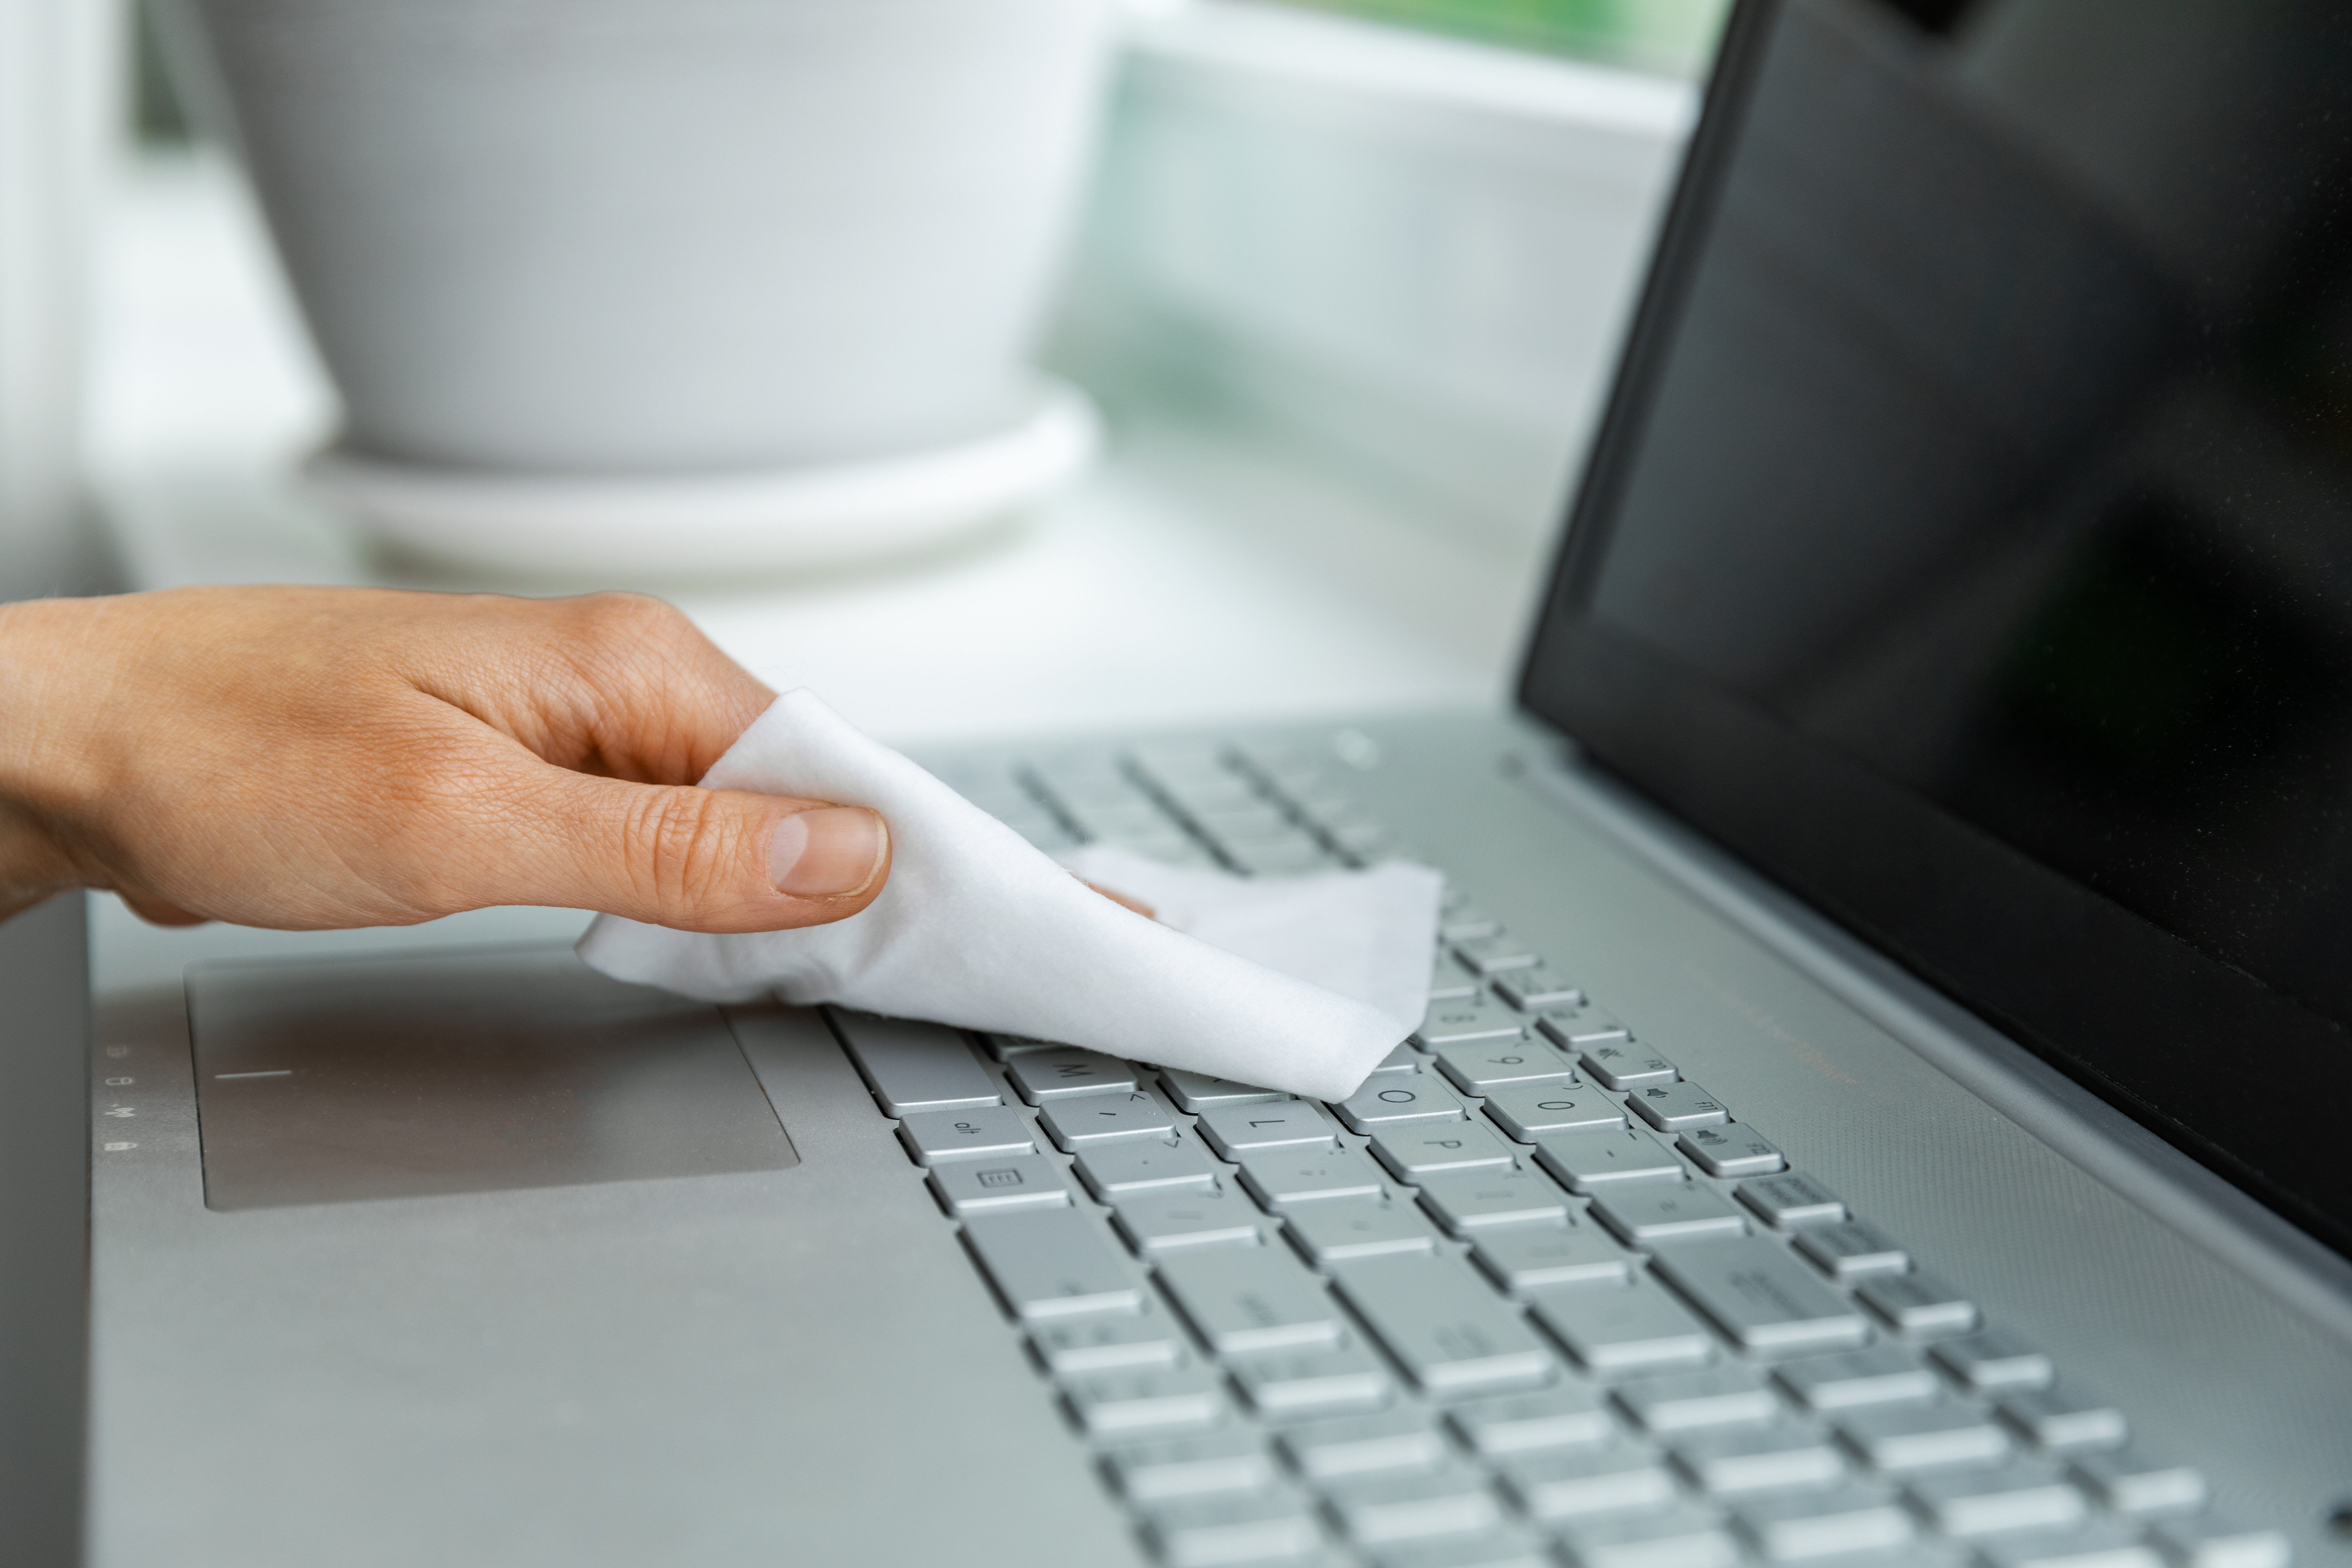 Person using a cloth to wipe down a laptop keyboard